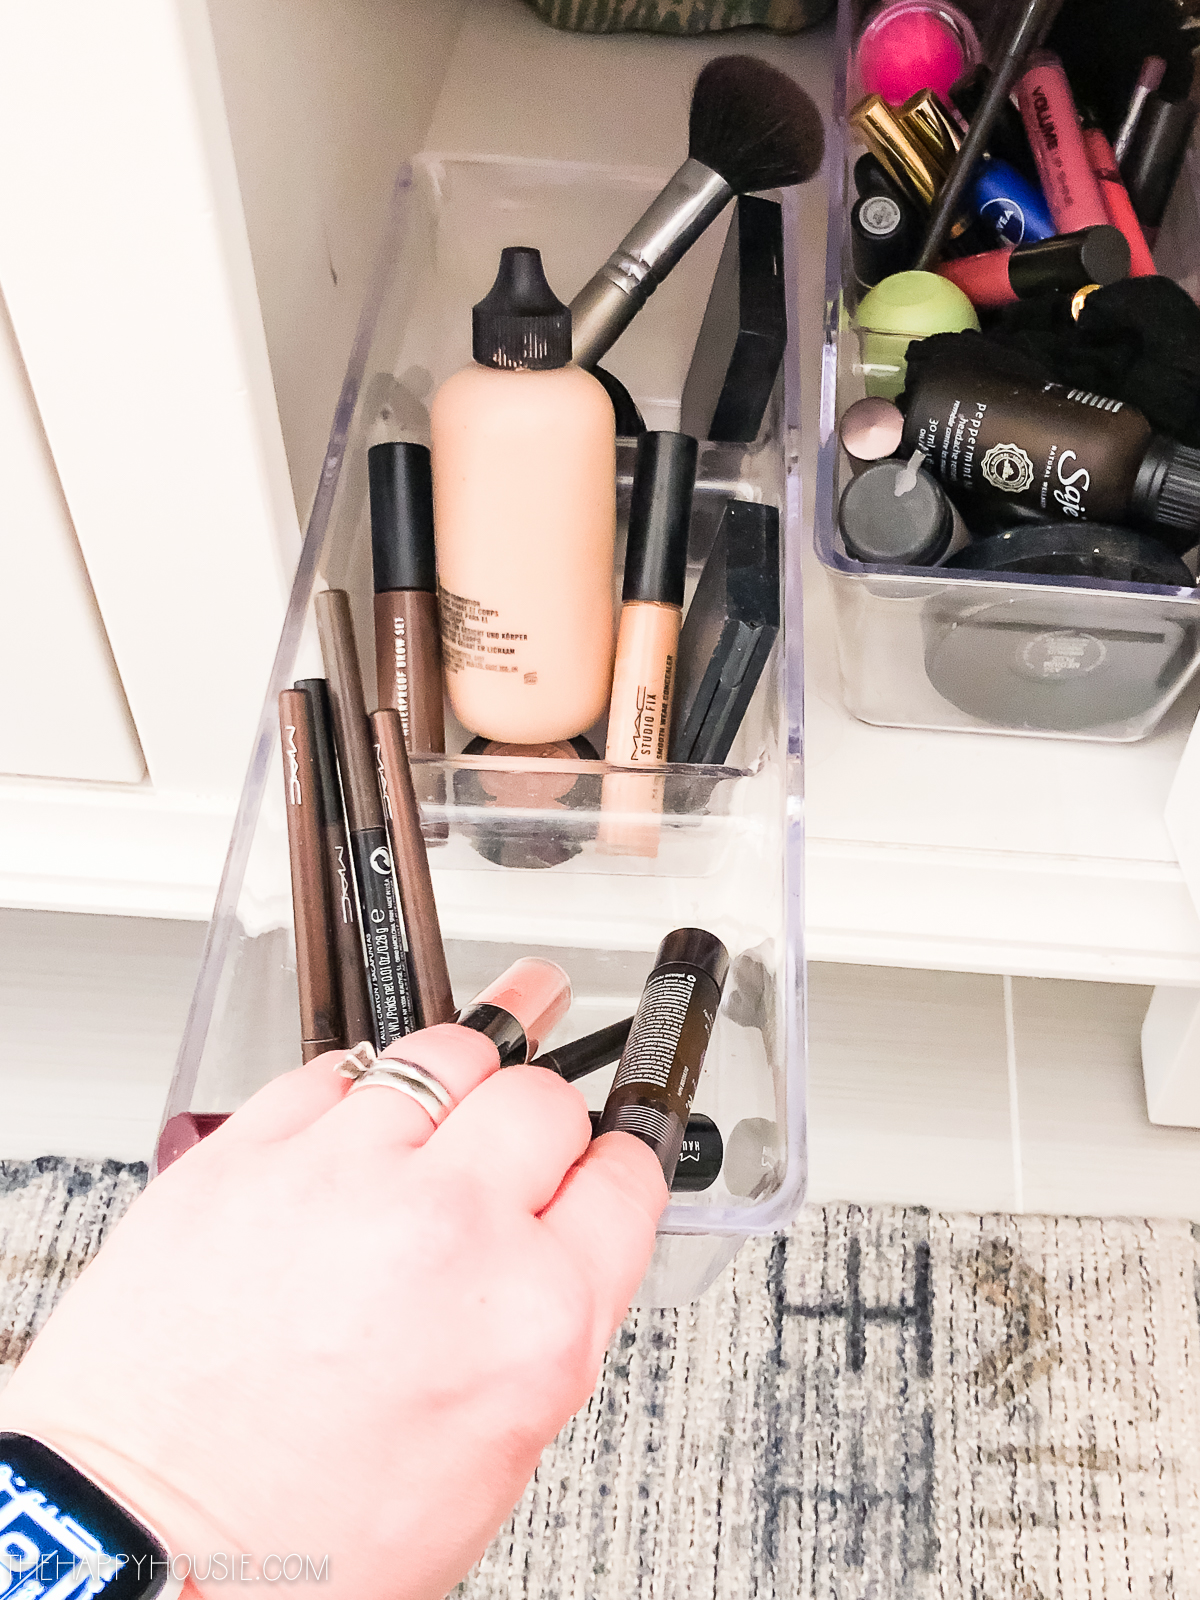 The makeup container organized.